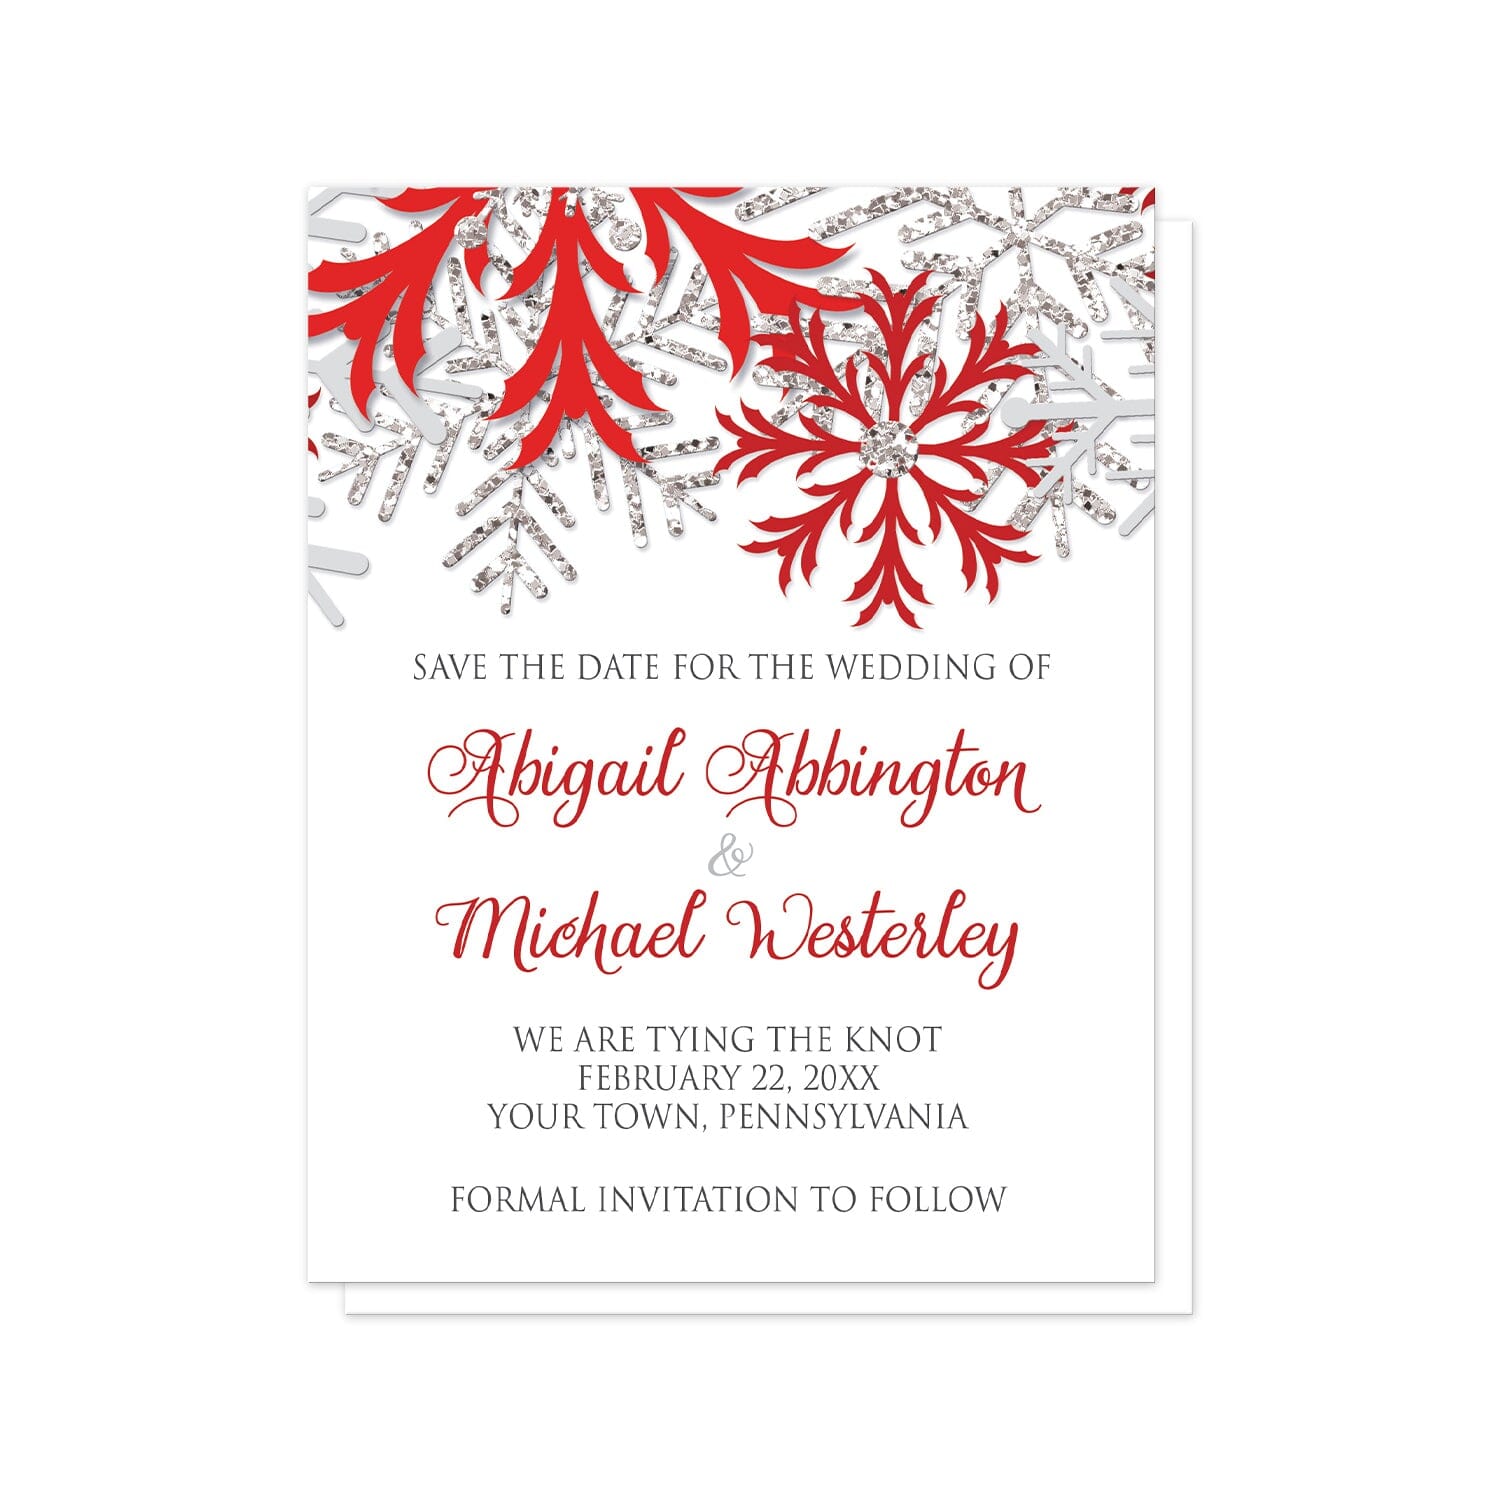 Winter Red Silver Snowflake Save the Date Cards at Artistically Invited. Beautiful winter red silver snowflake save the date cards designed with red, darker red, silver-colored glitter-illustrated, and light gray snowflakes along the top over a white background. Your personalized wedding date details are custom printed in red and gray below the pretty snowflakes.